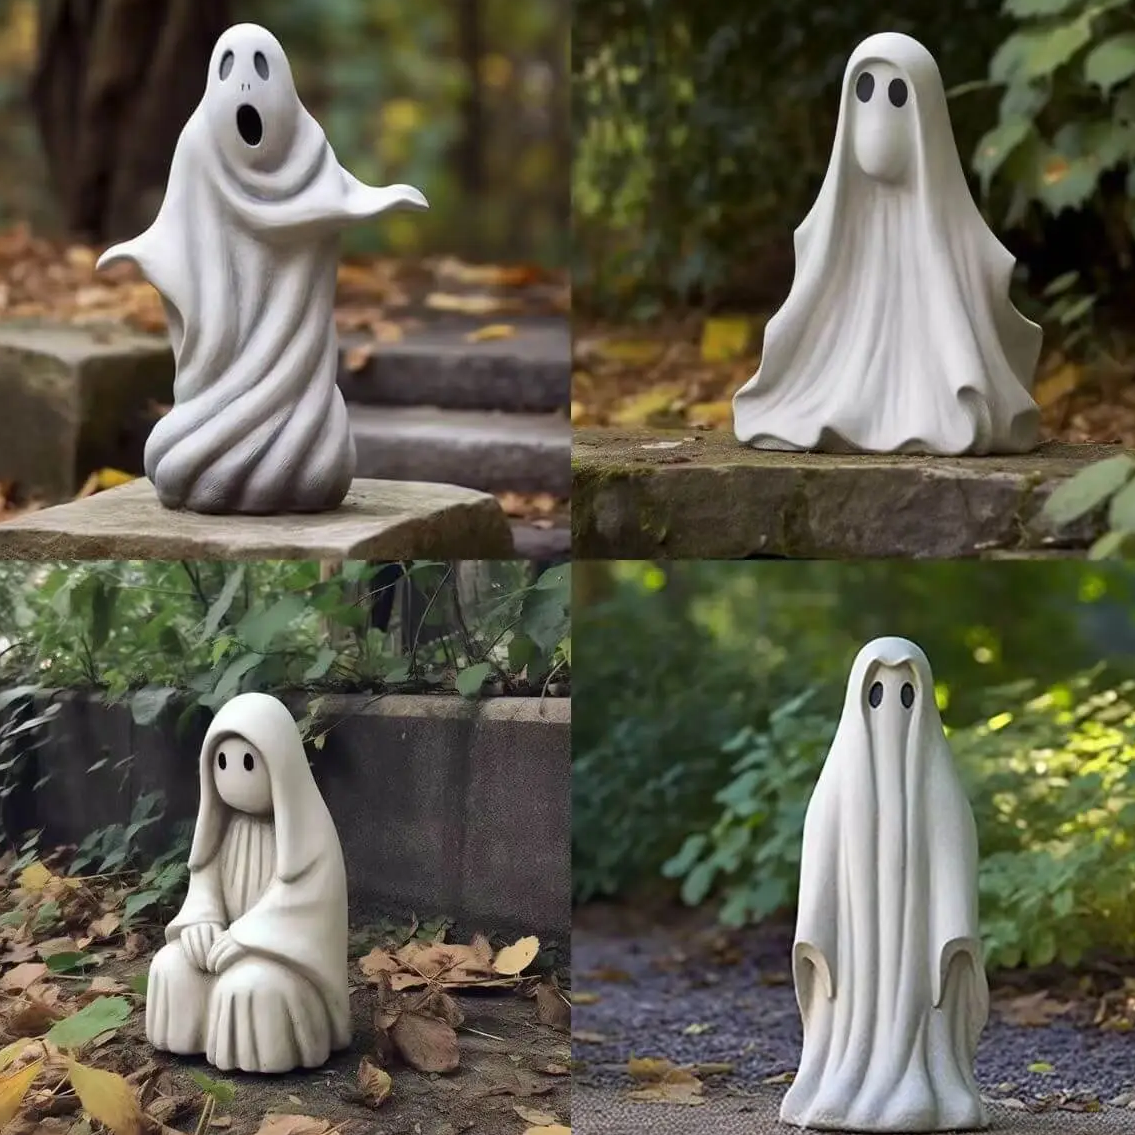 Cute Small Resin Statue Decorations Ornaments Halloweern Ghost Sculptures